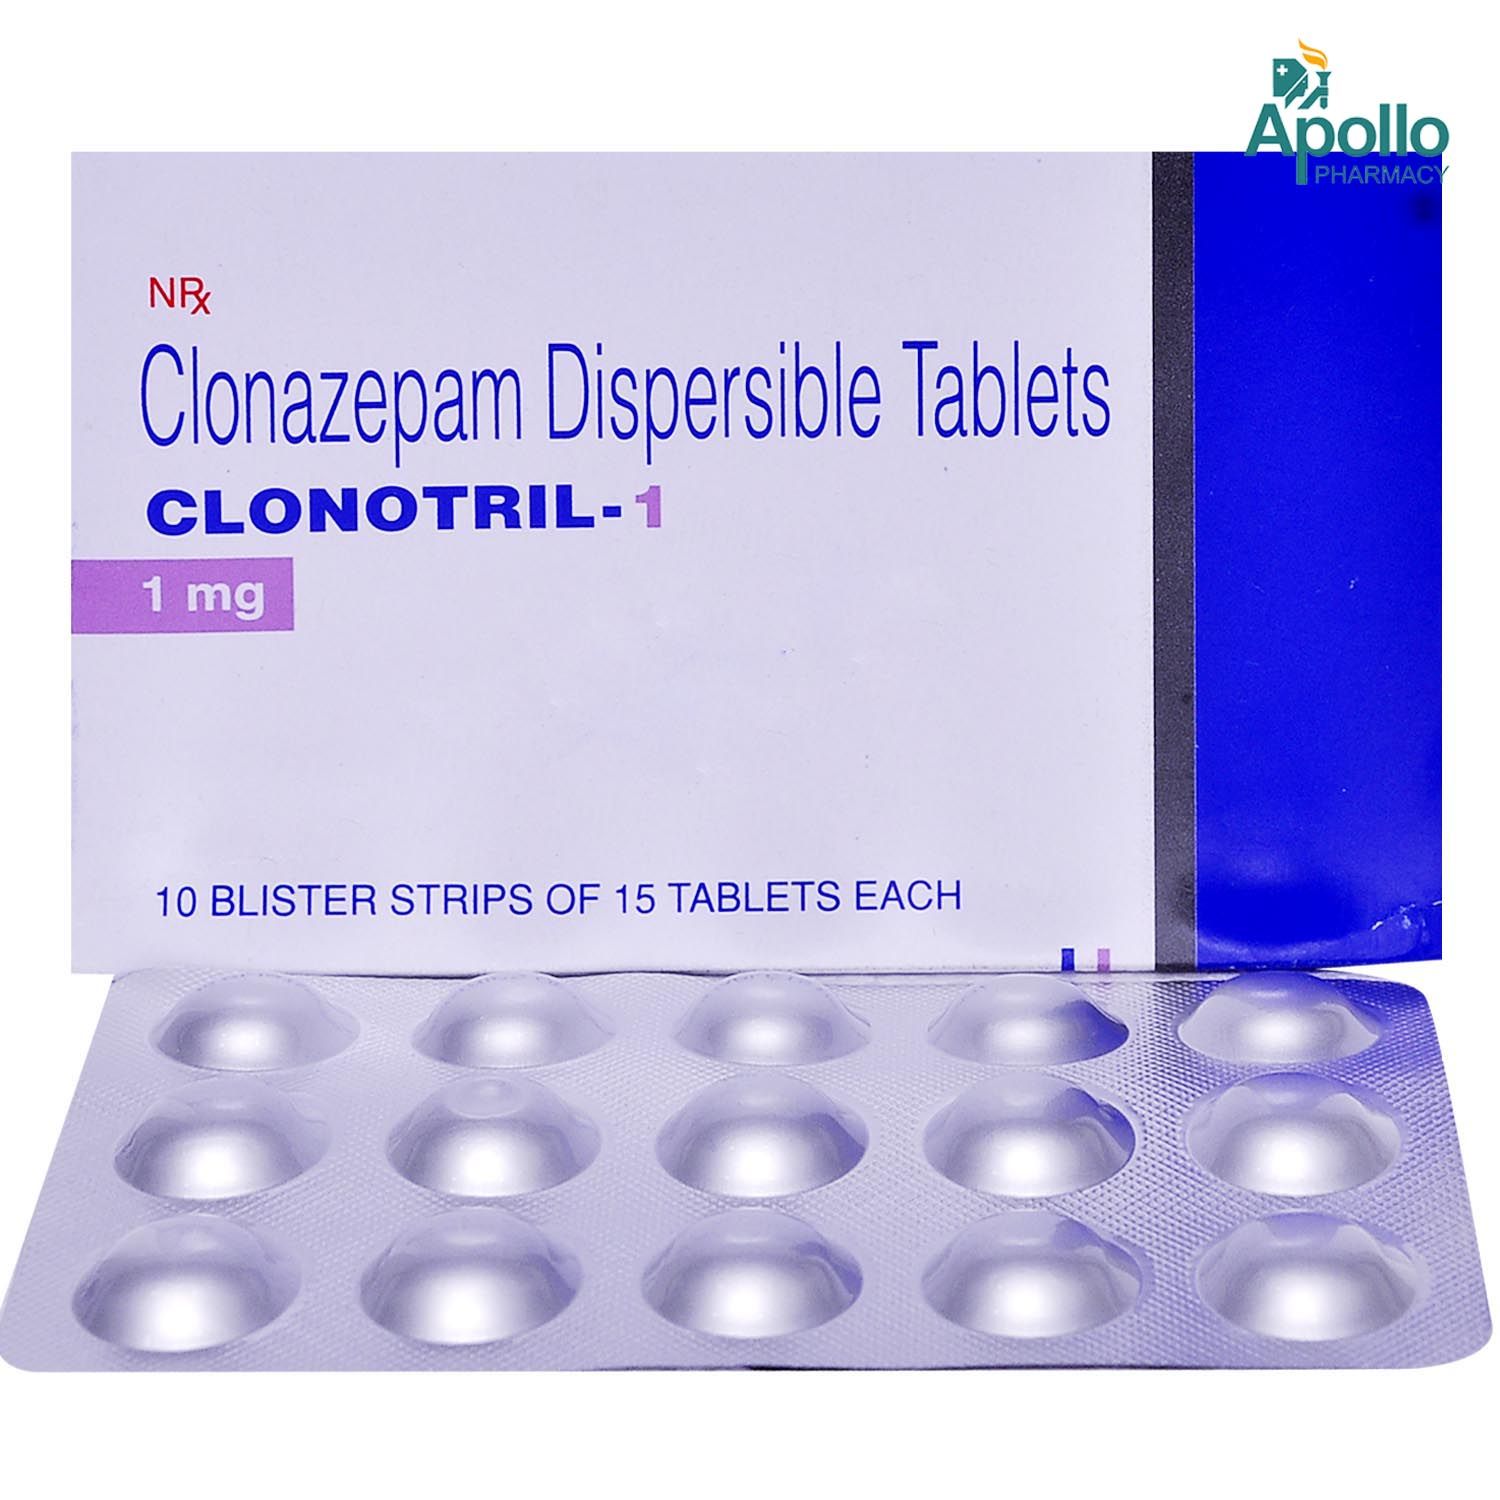 CLONOTRIL 1MG TABLET Price, Uses, Side Effects, Composition - Apollo